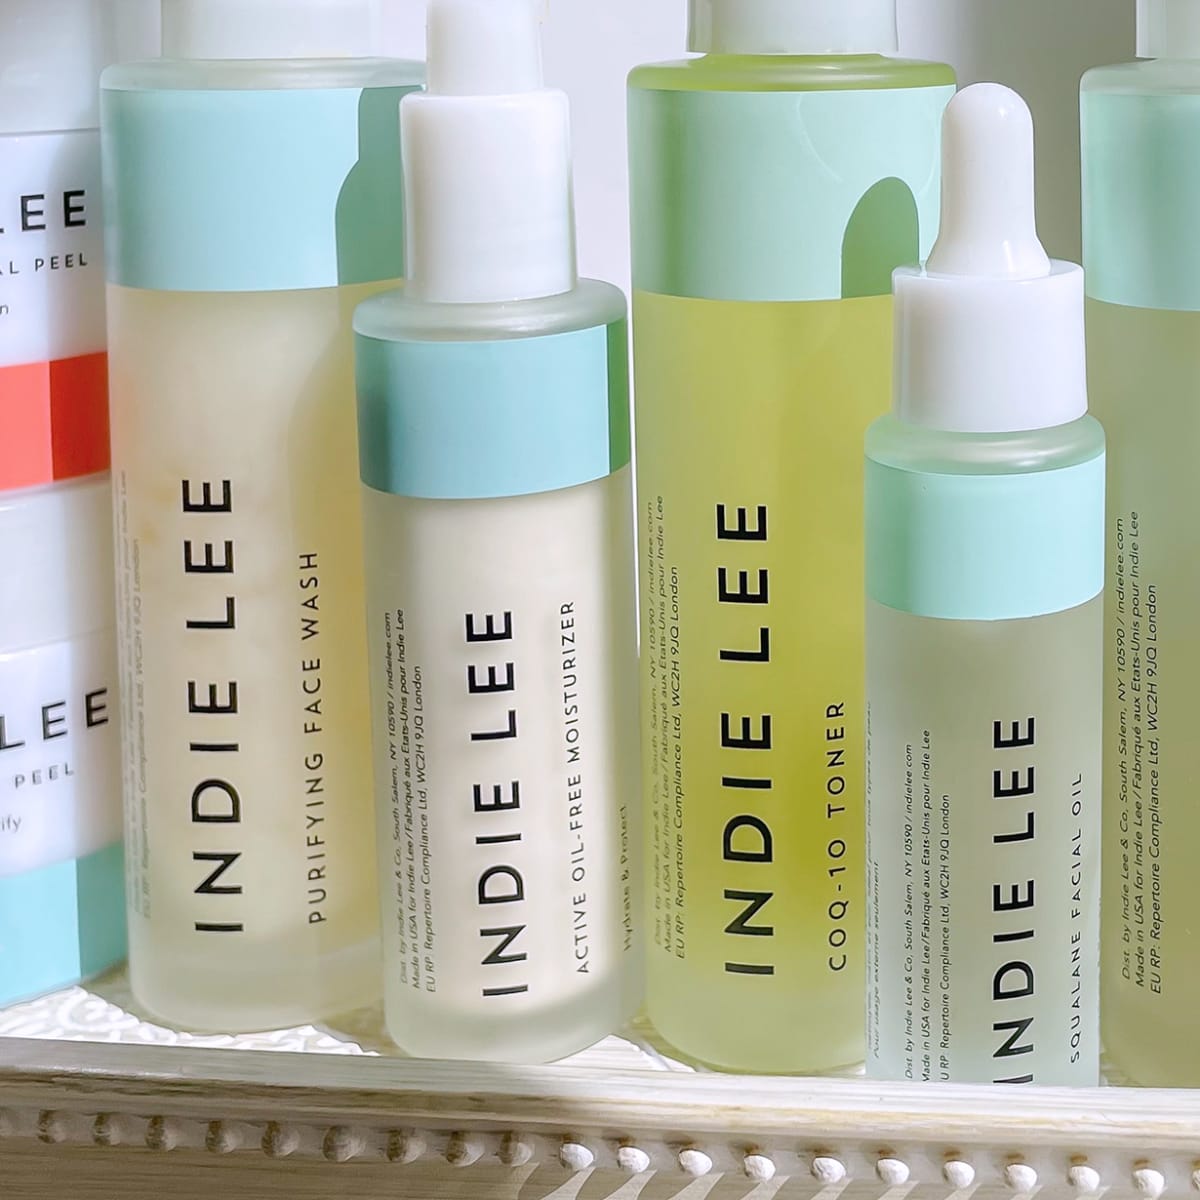 Indie Lee Review: Best and Worst Products - The Skincare Edit